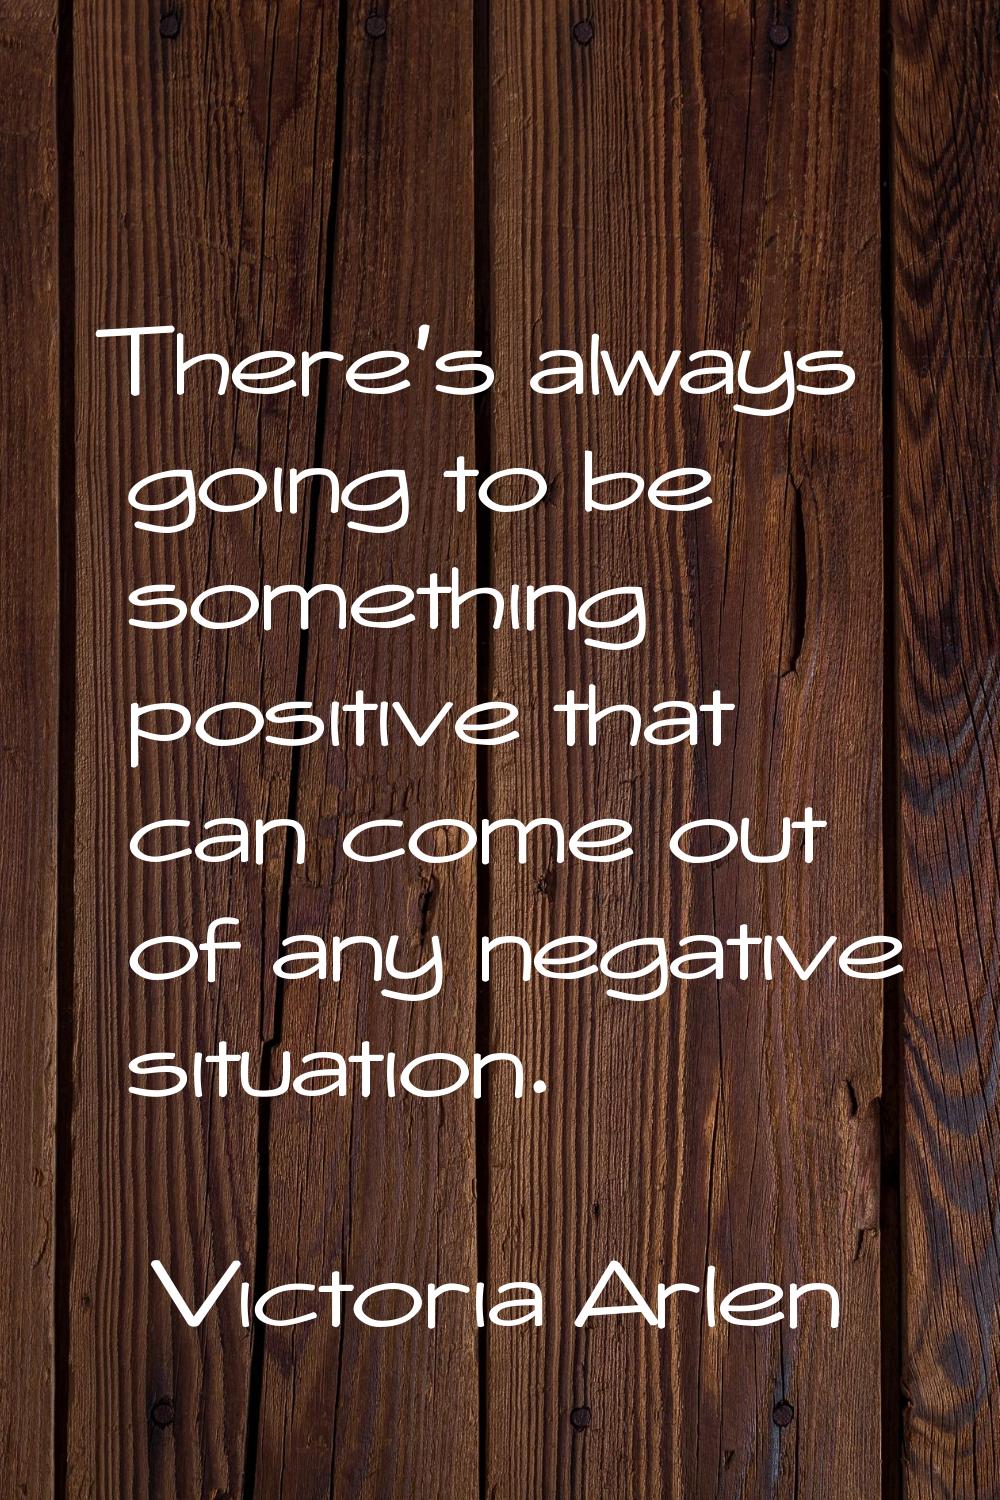 There's always going to be something positive that can come out of any negative situation.